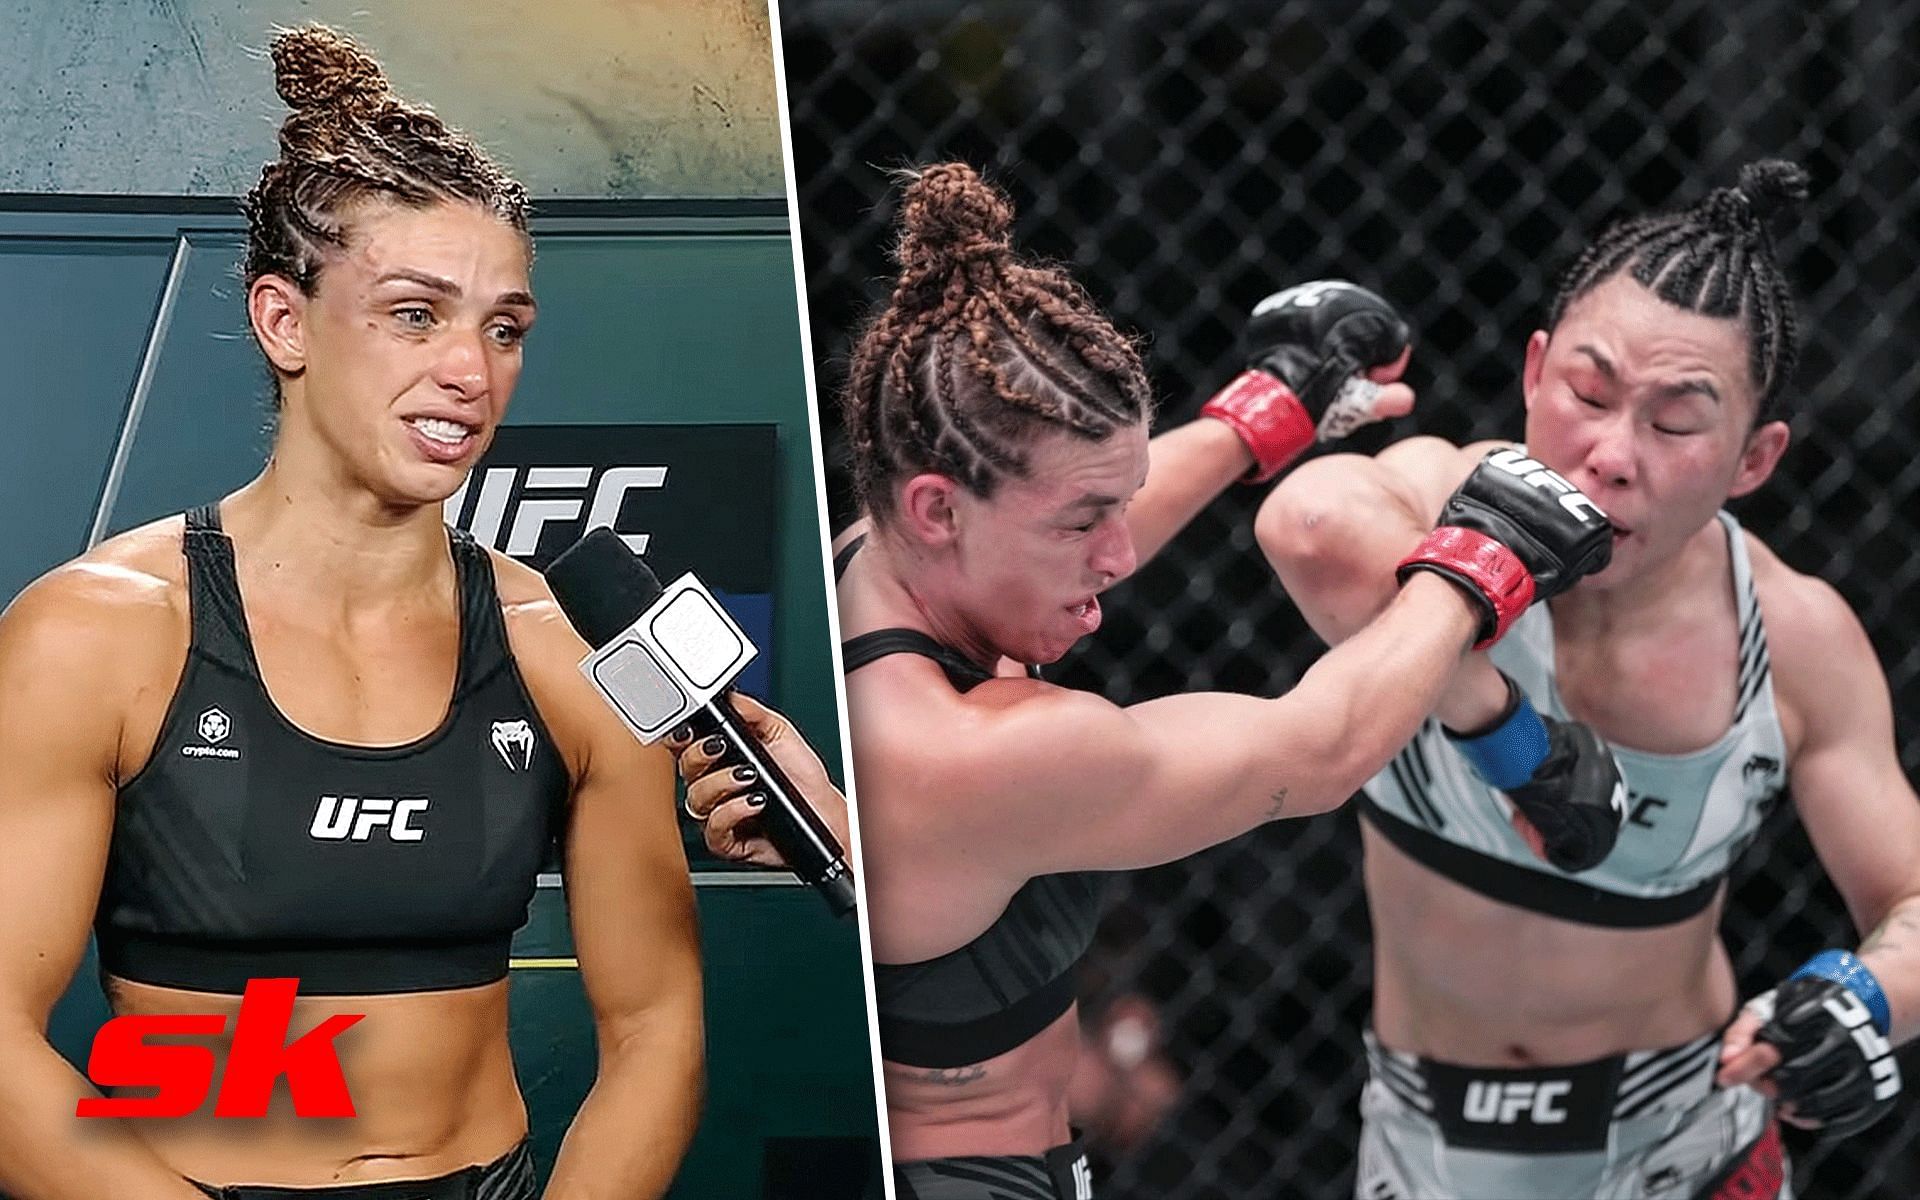 Mackenzie Dern ended up on the losing side at UFC Vegas 61 [Image credits: ESPN MMA on YouTube and @ufc on Instagram]